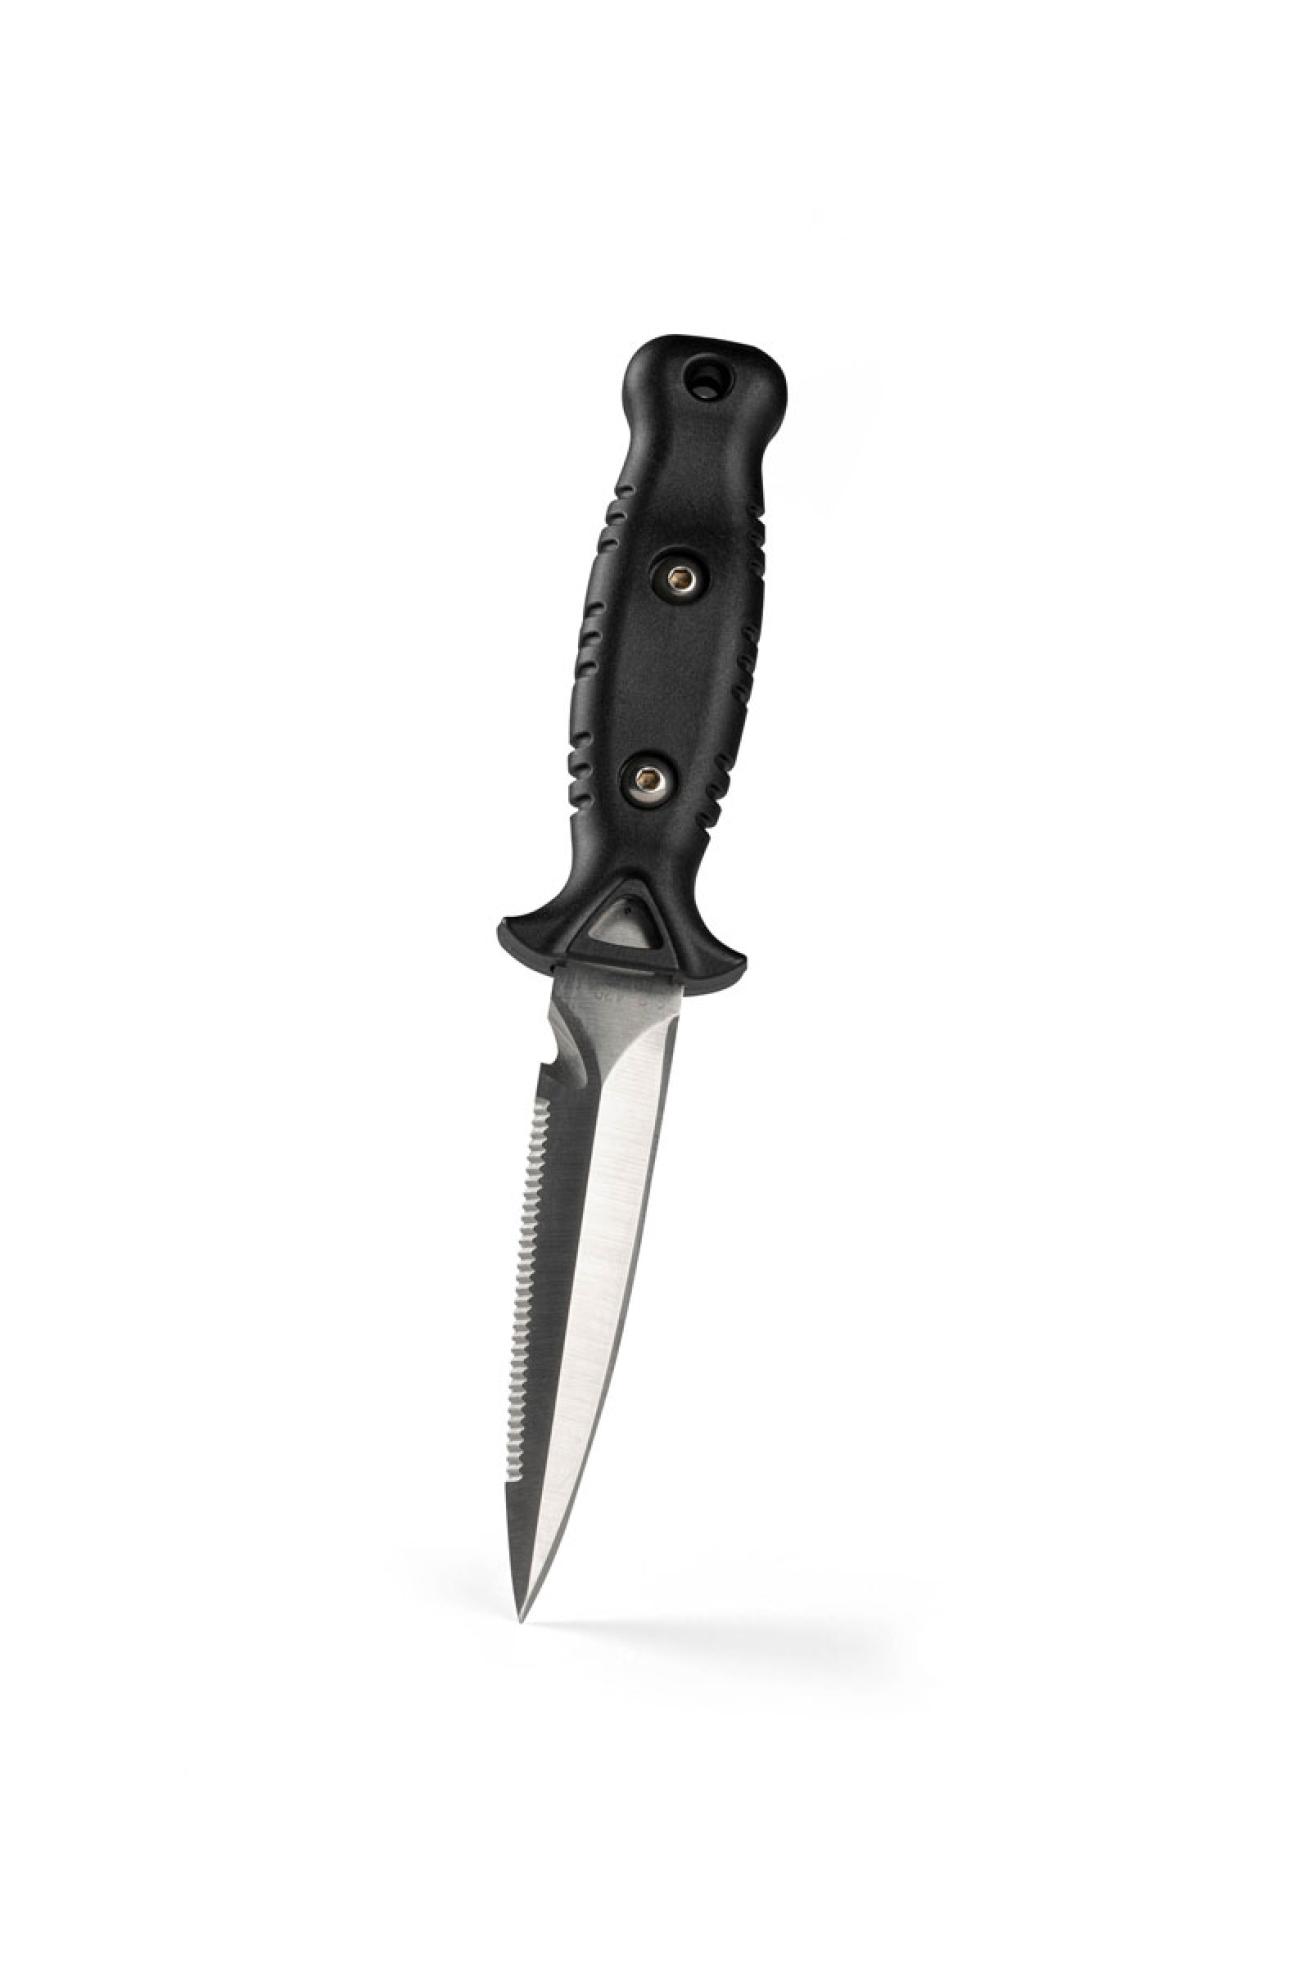 Akona dive knife for scuba diving, freediving or spearfishing